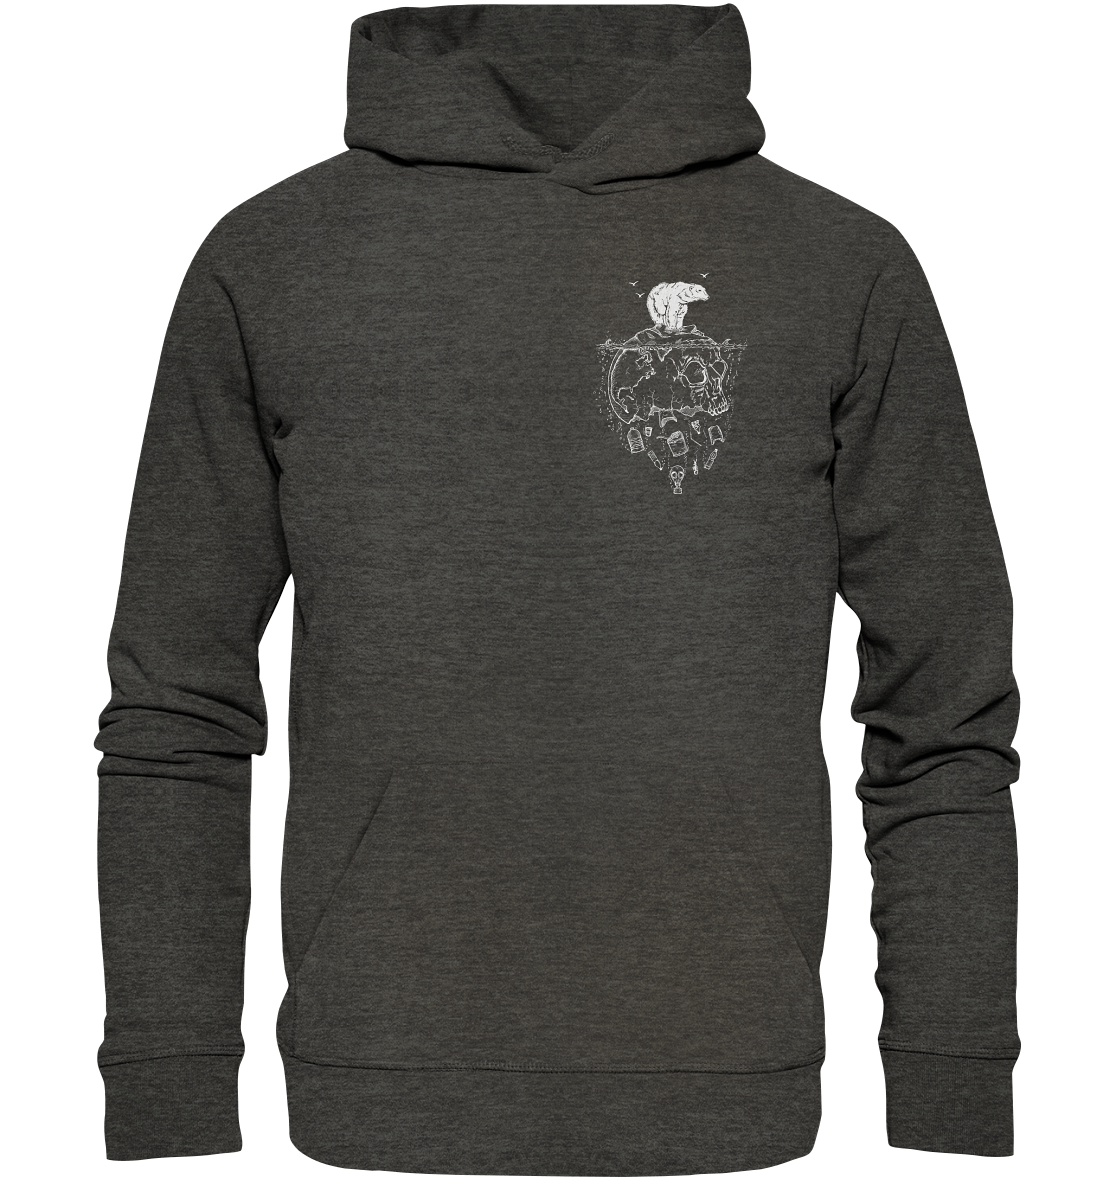 front-organic-hoodie-252625-1116x-16.png